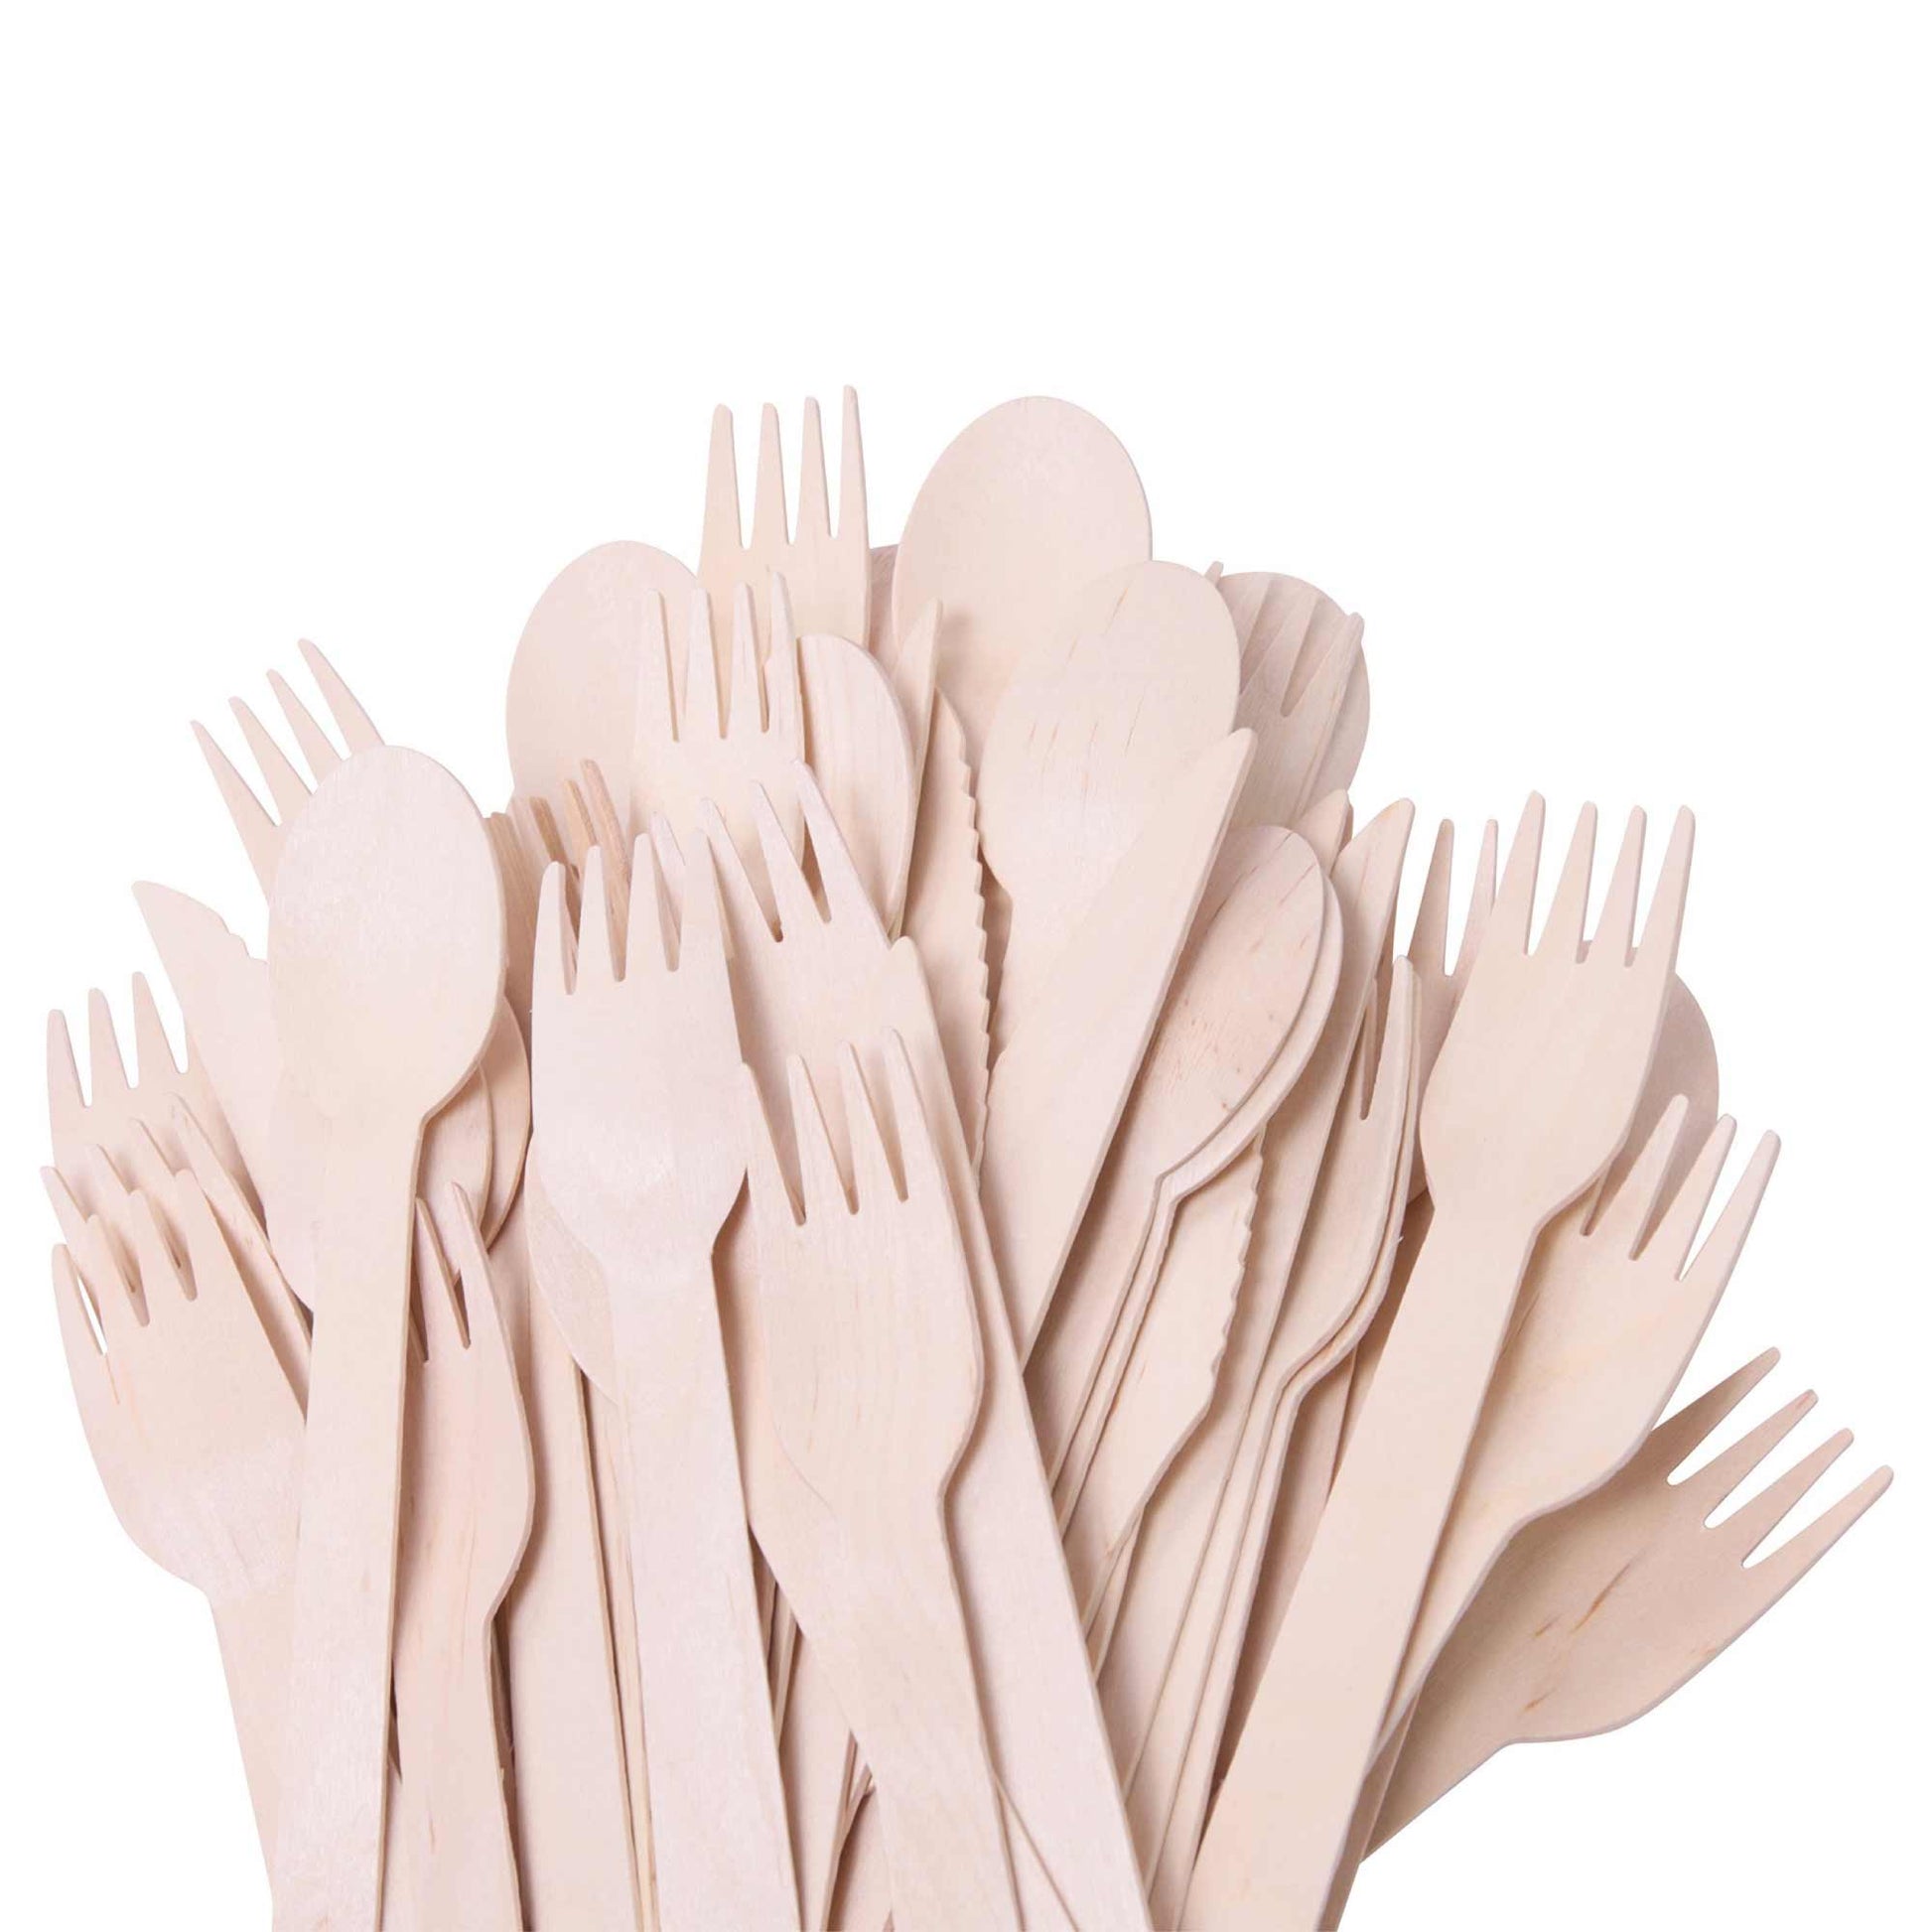 Bulk 1000 Wooden Cutlery Set - Disposable Biodegradable Eco Knives Forks Spoons